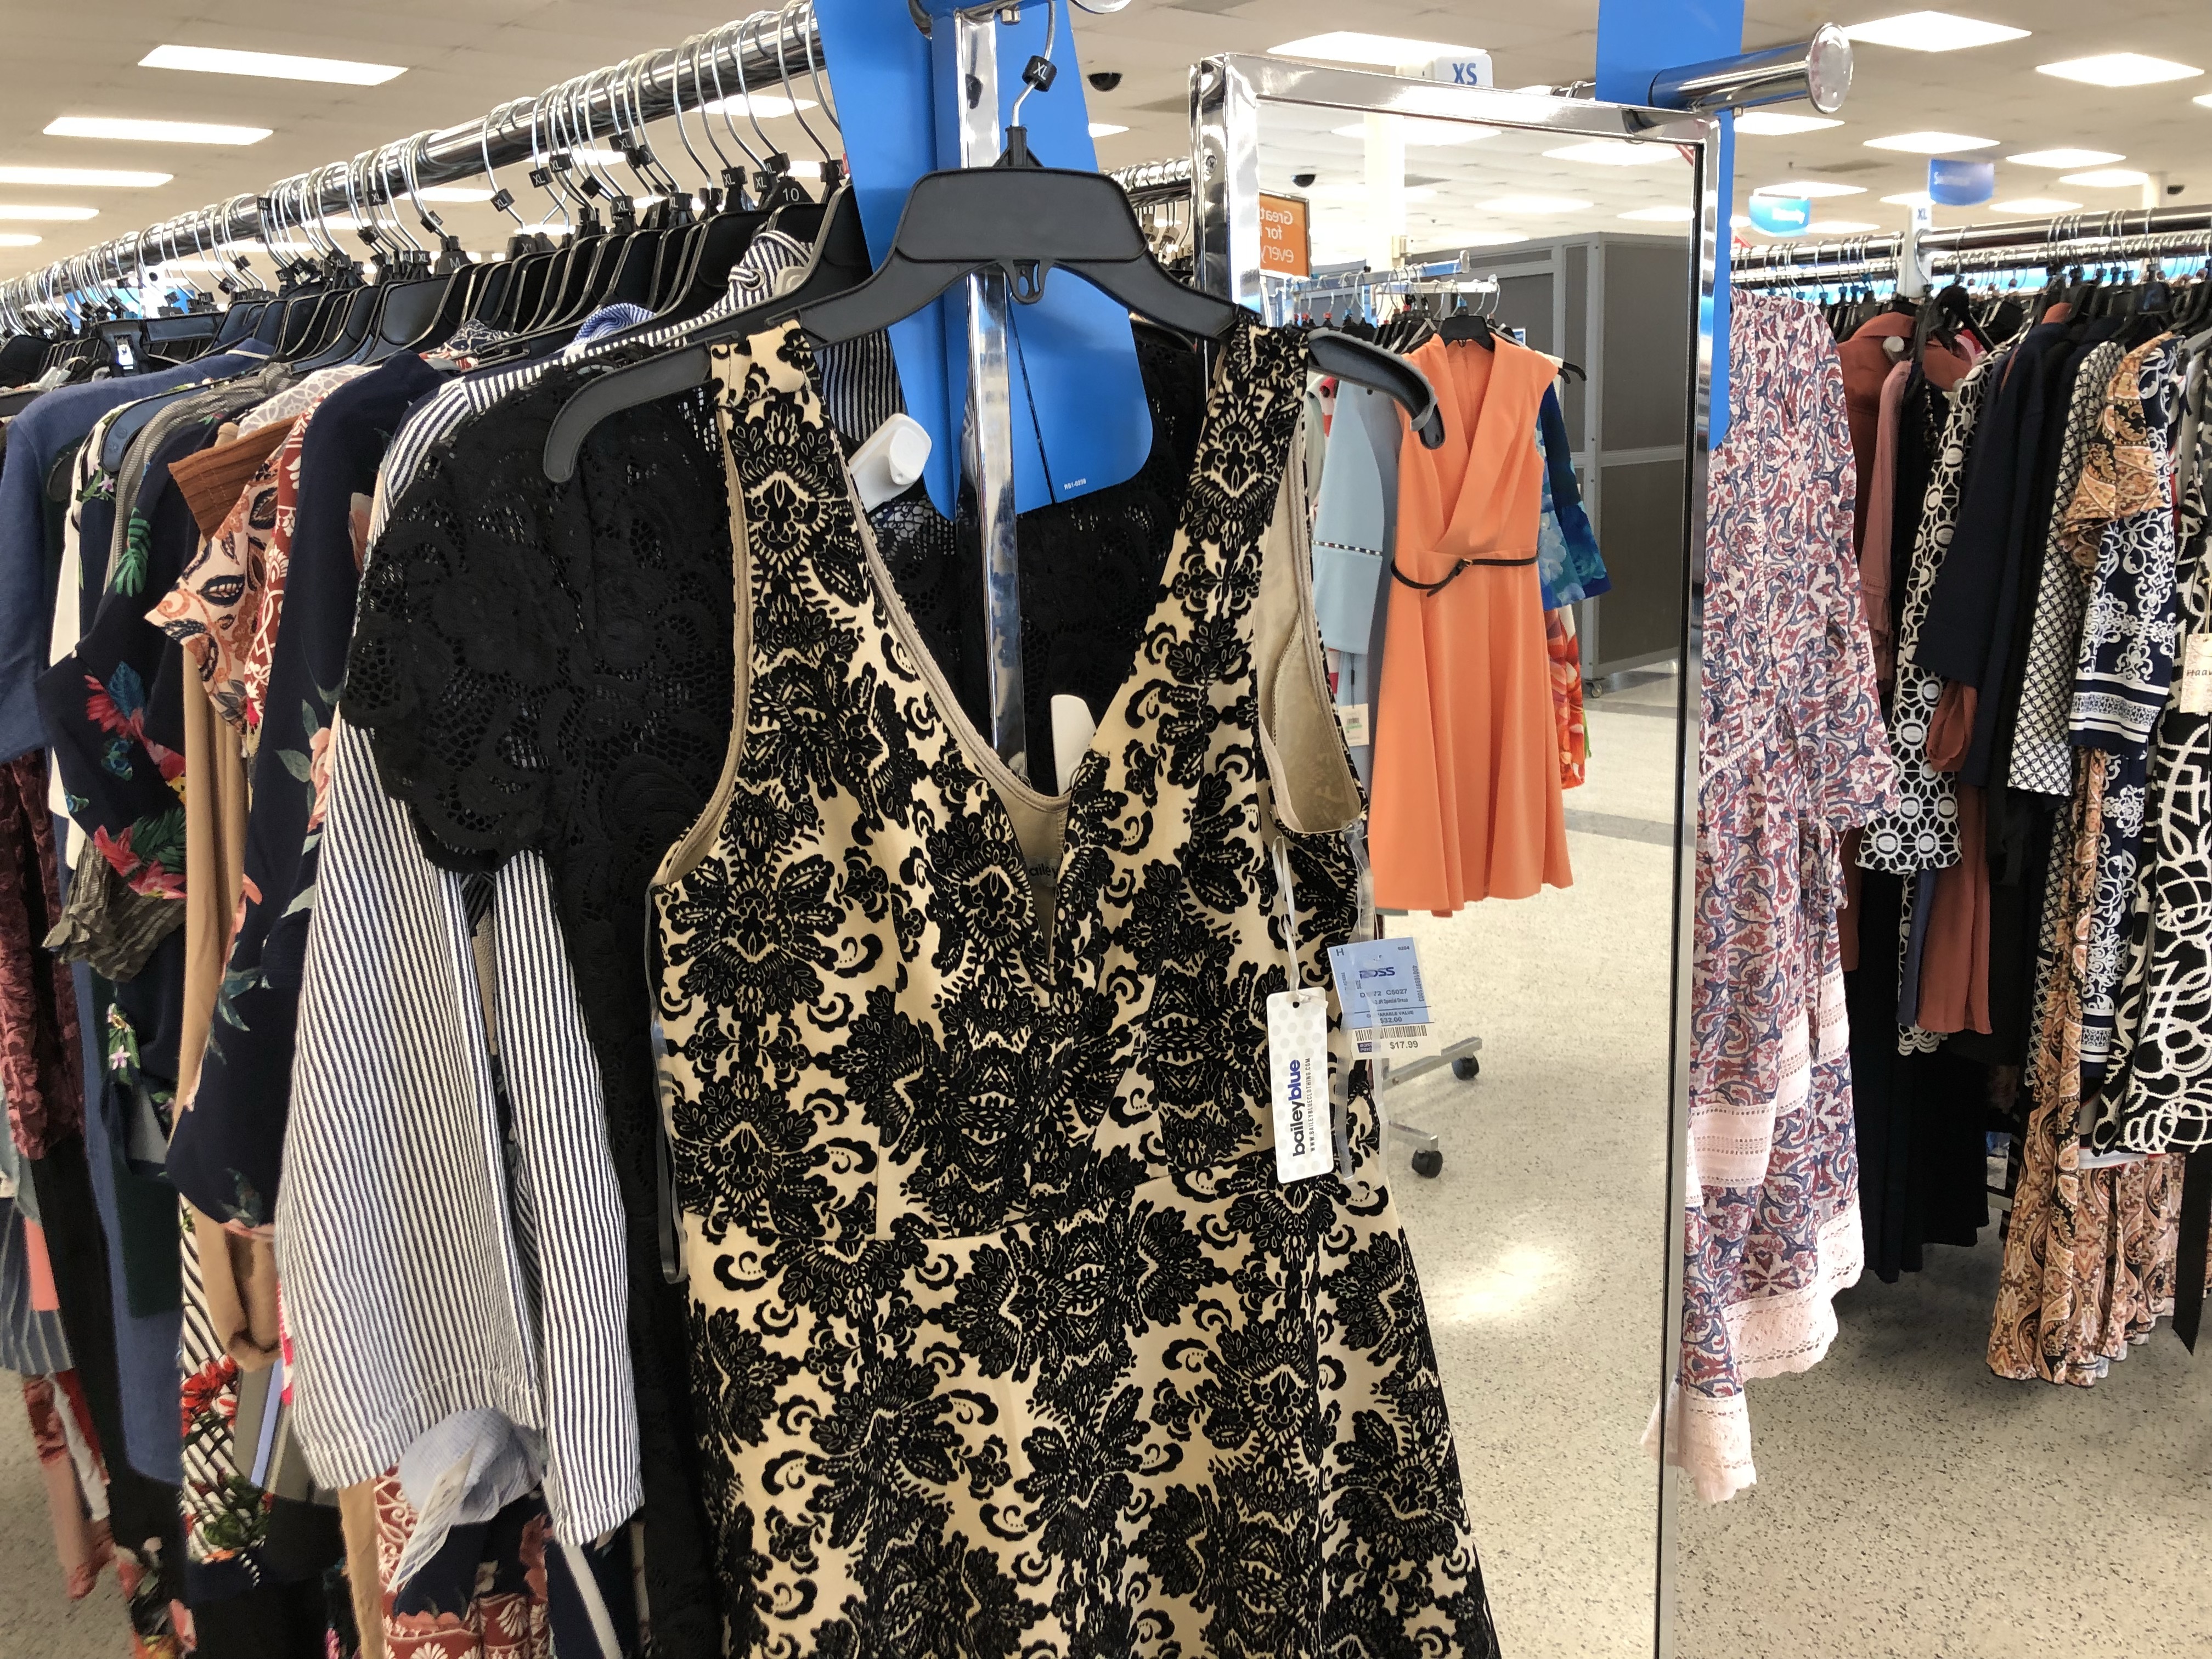 prom dresses at ross department store